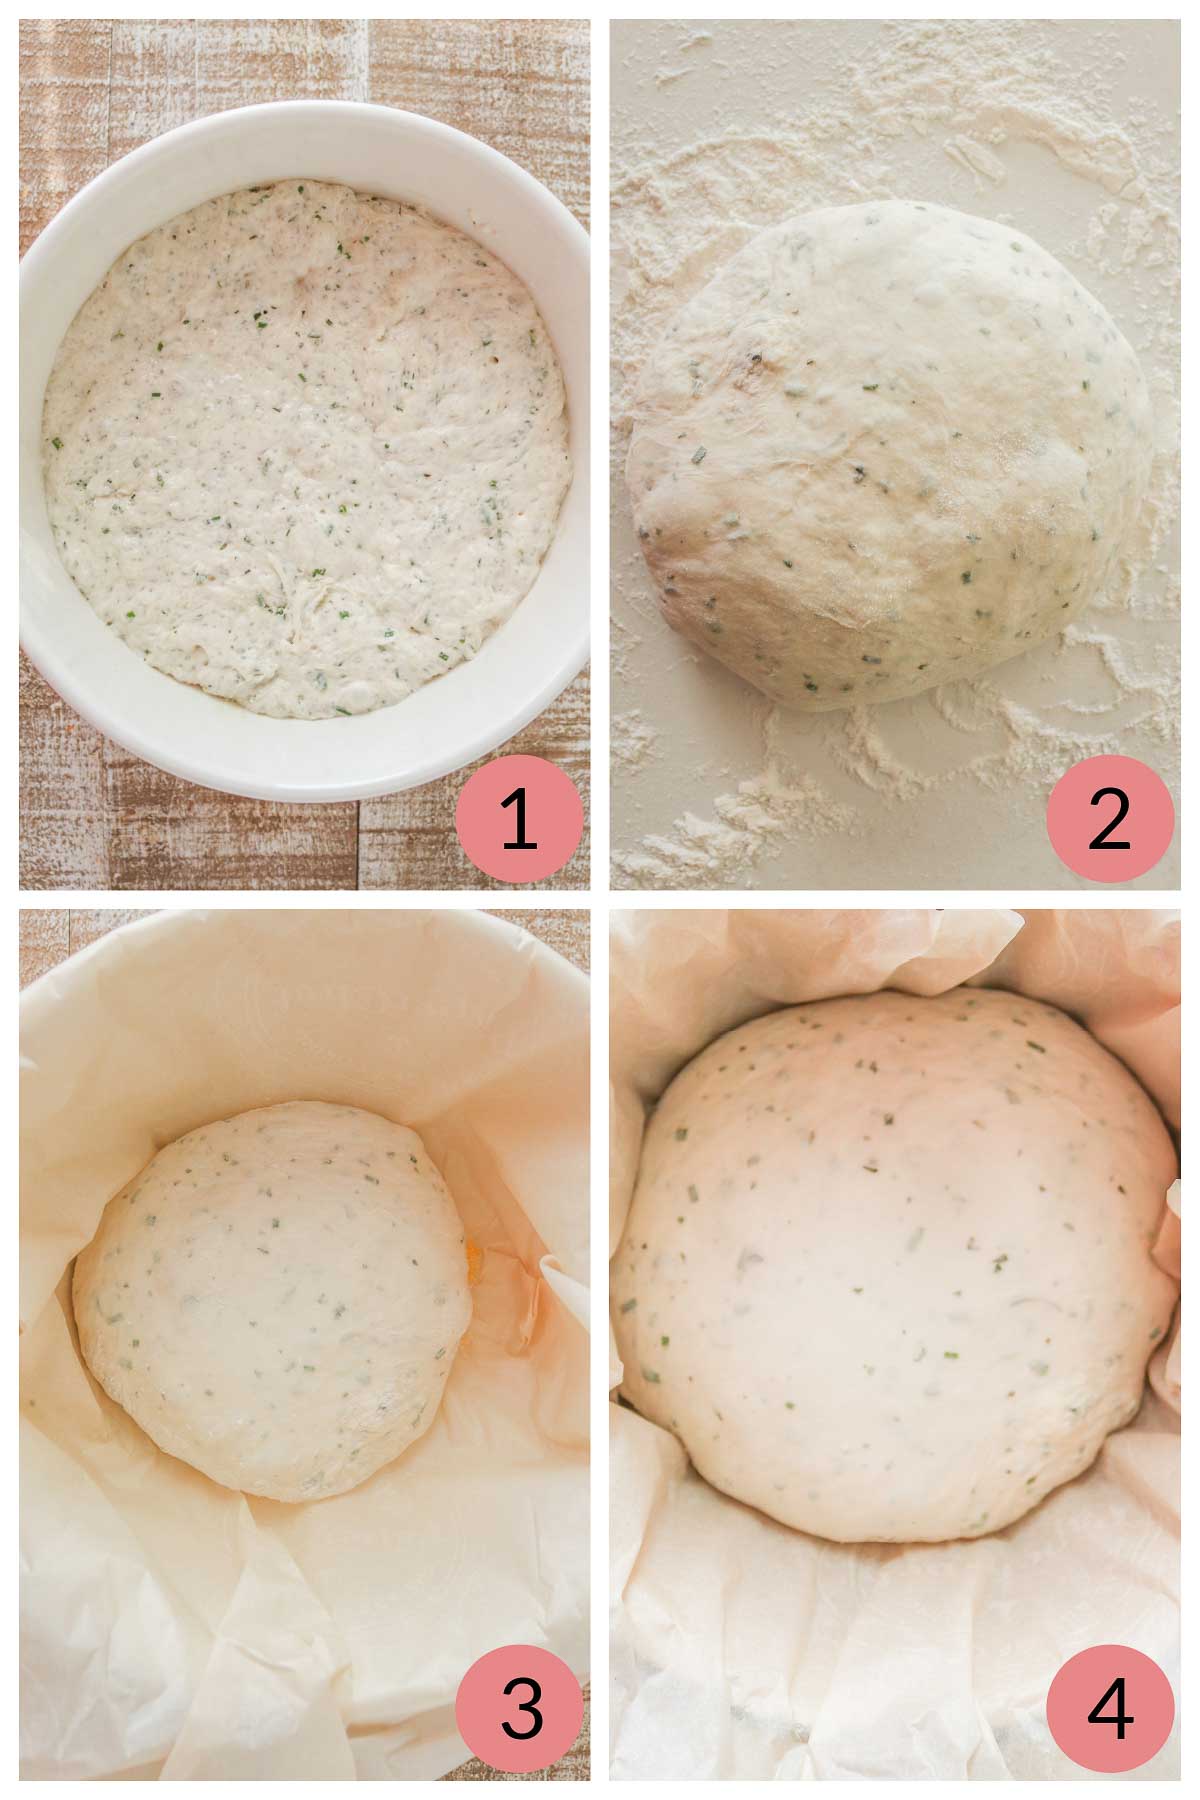 Collage of steps to rise and form bread dough before baking.